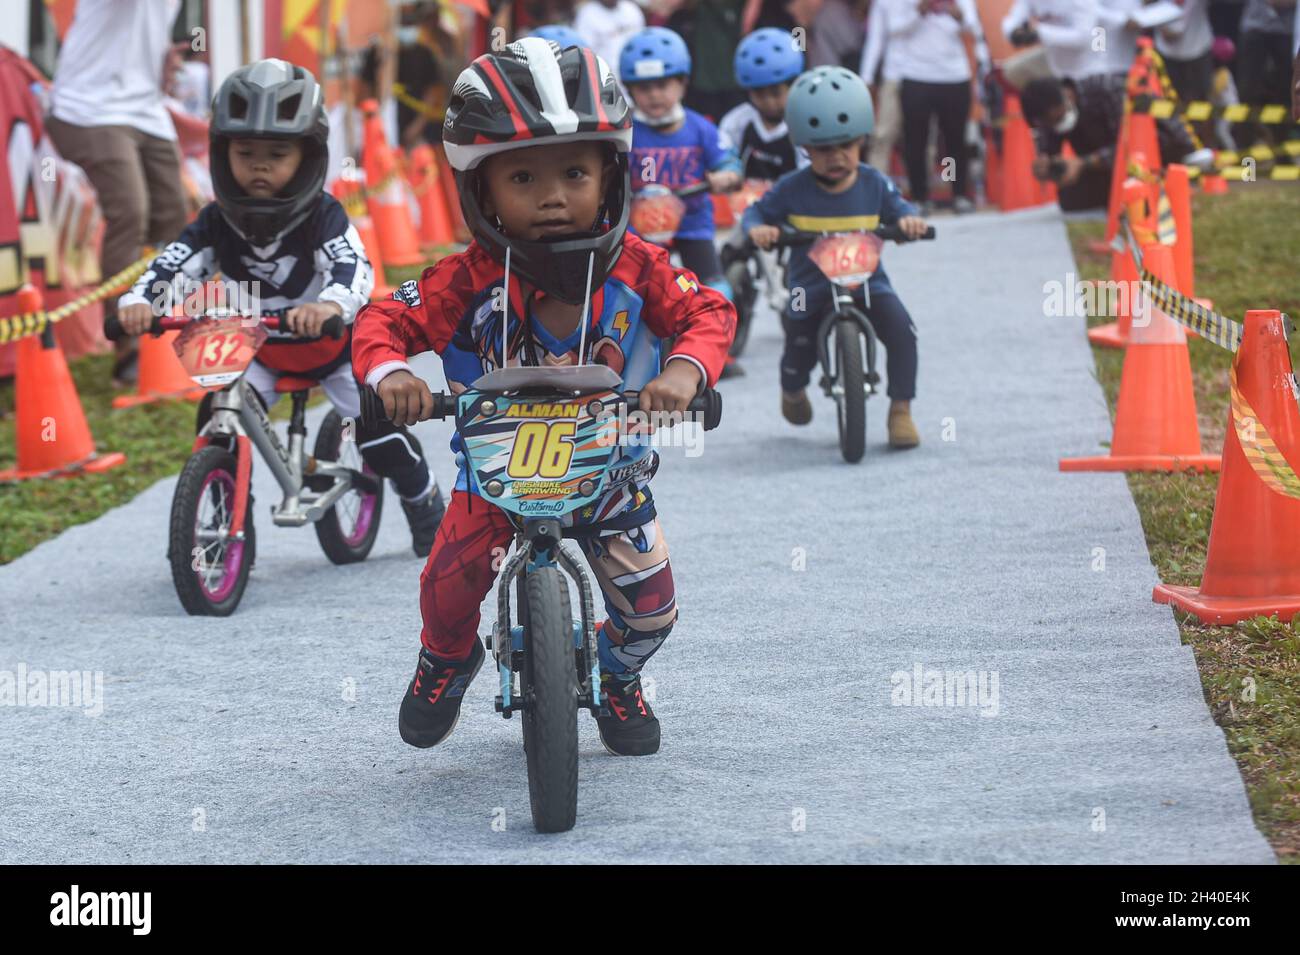 Jakarta. 31st Oct, 2021. Children participate in Balance Bike Competition in three-year-old boys race category in Jakarta, Indonesia. Oct